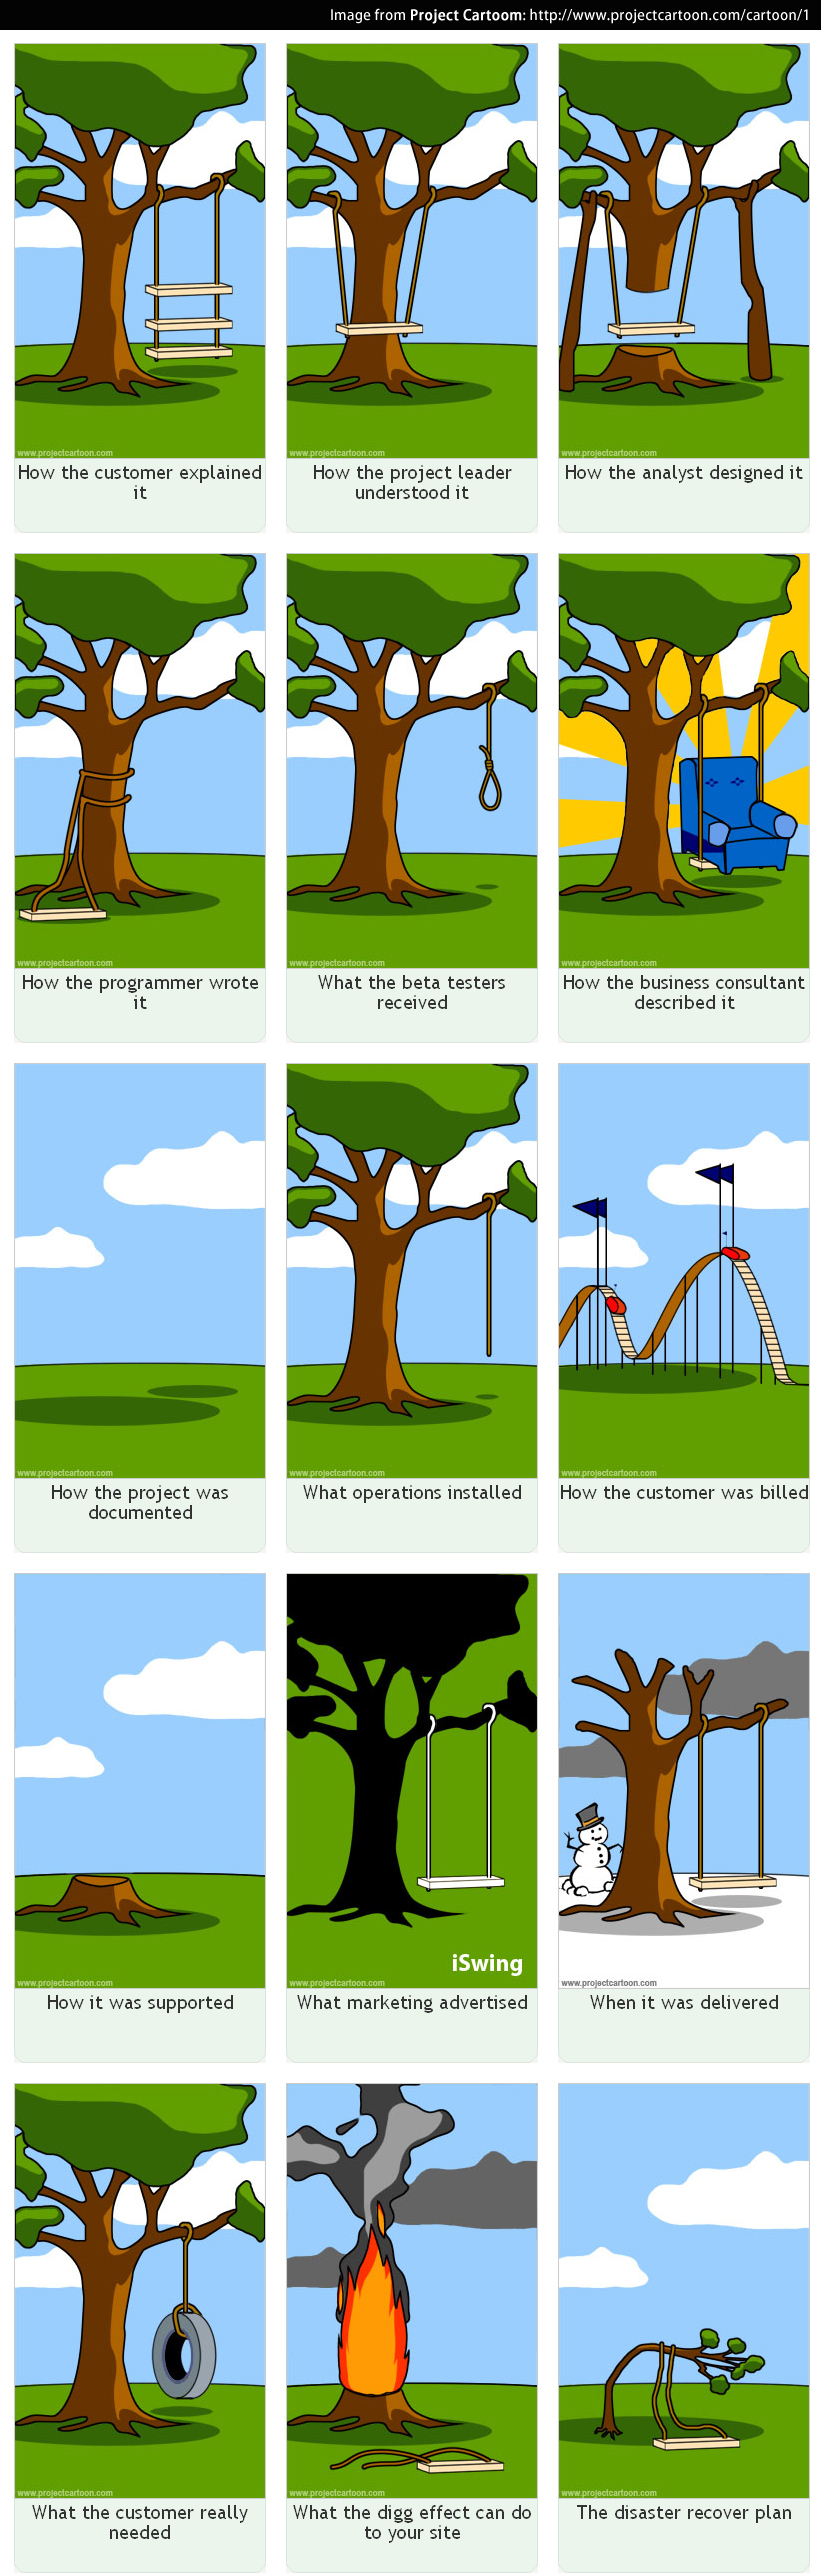 Project Cartoon: How IT Projects Really Work